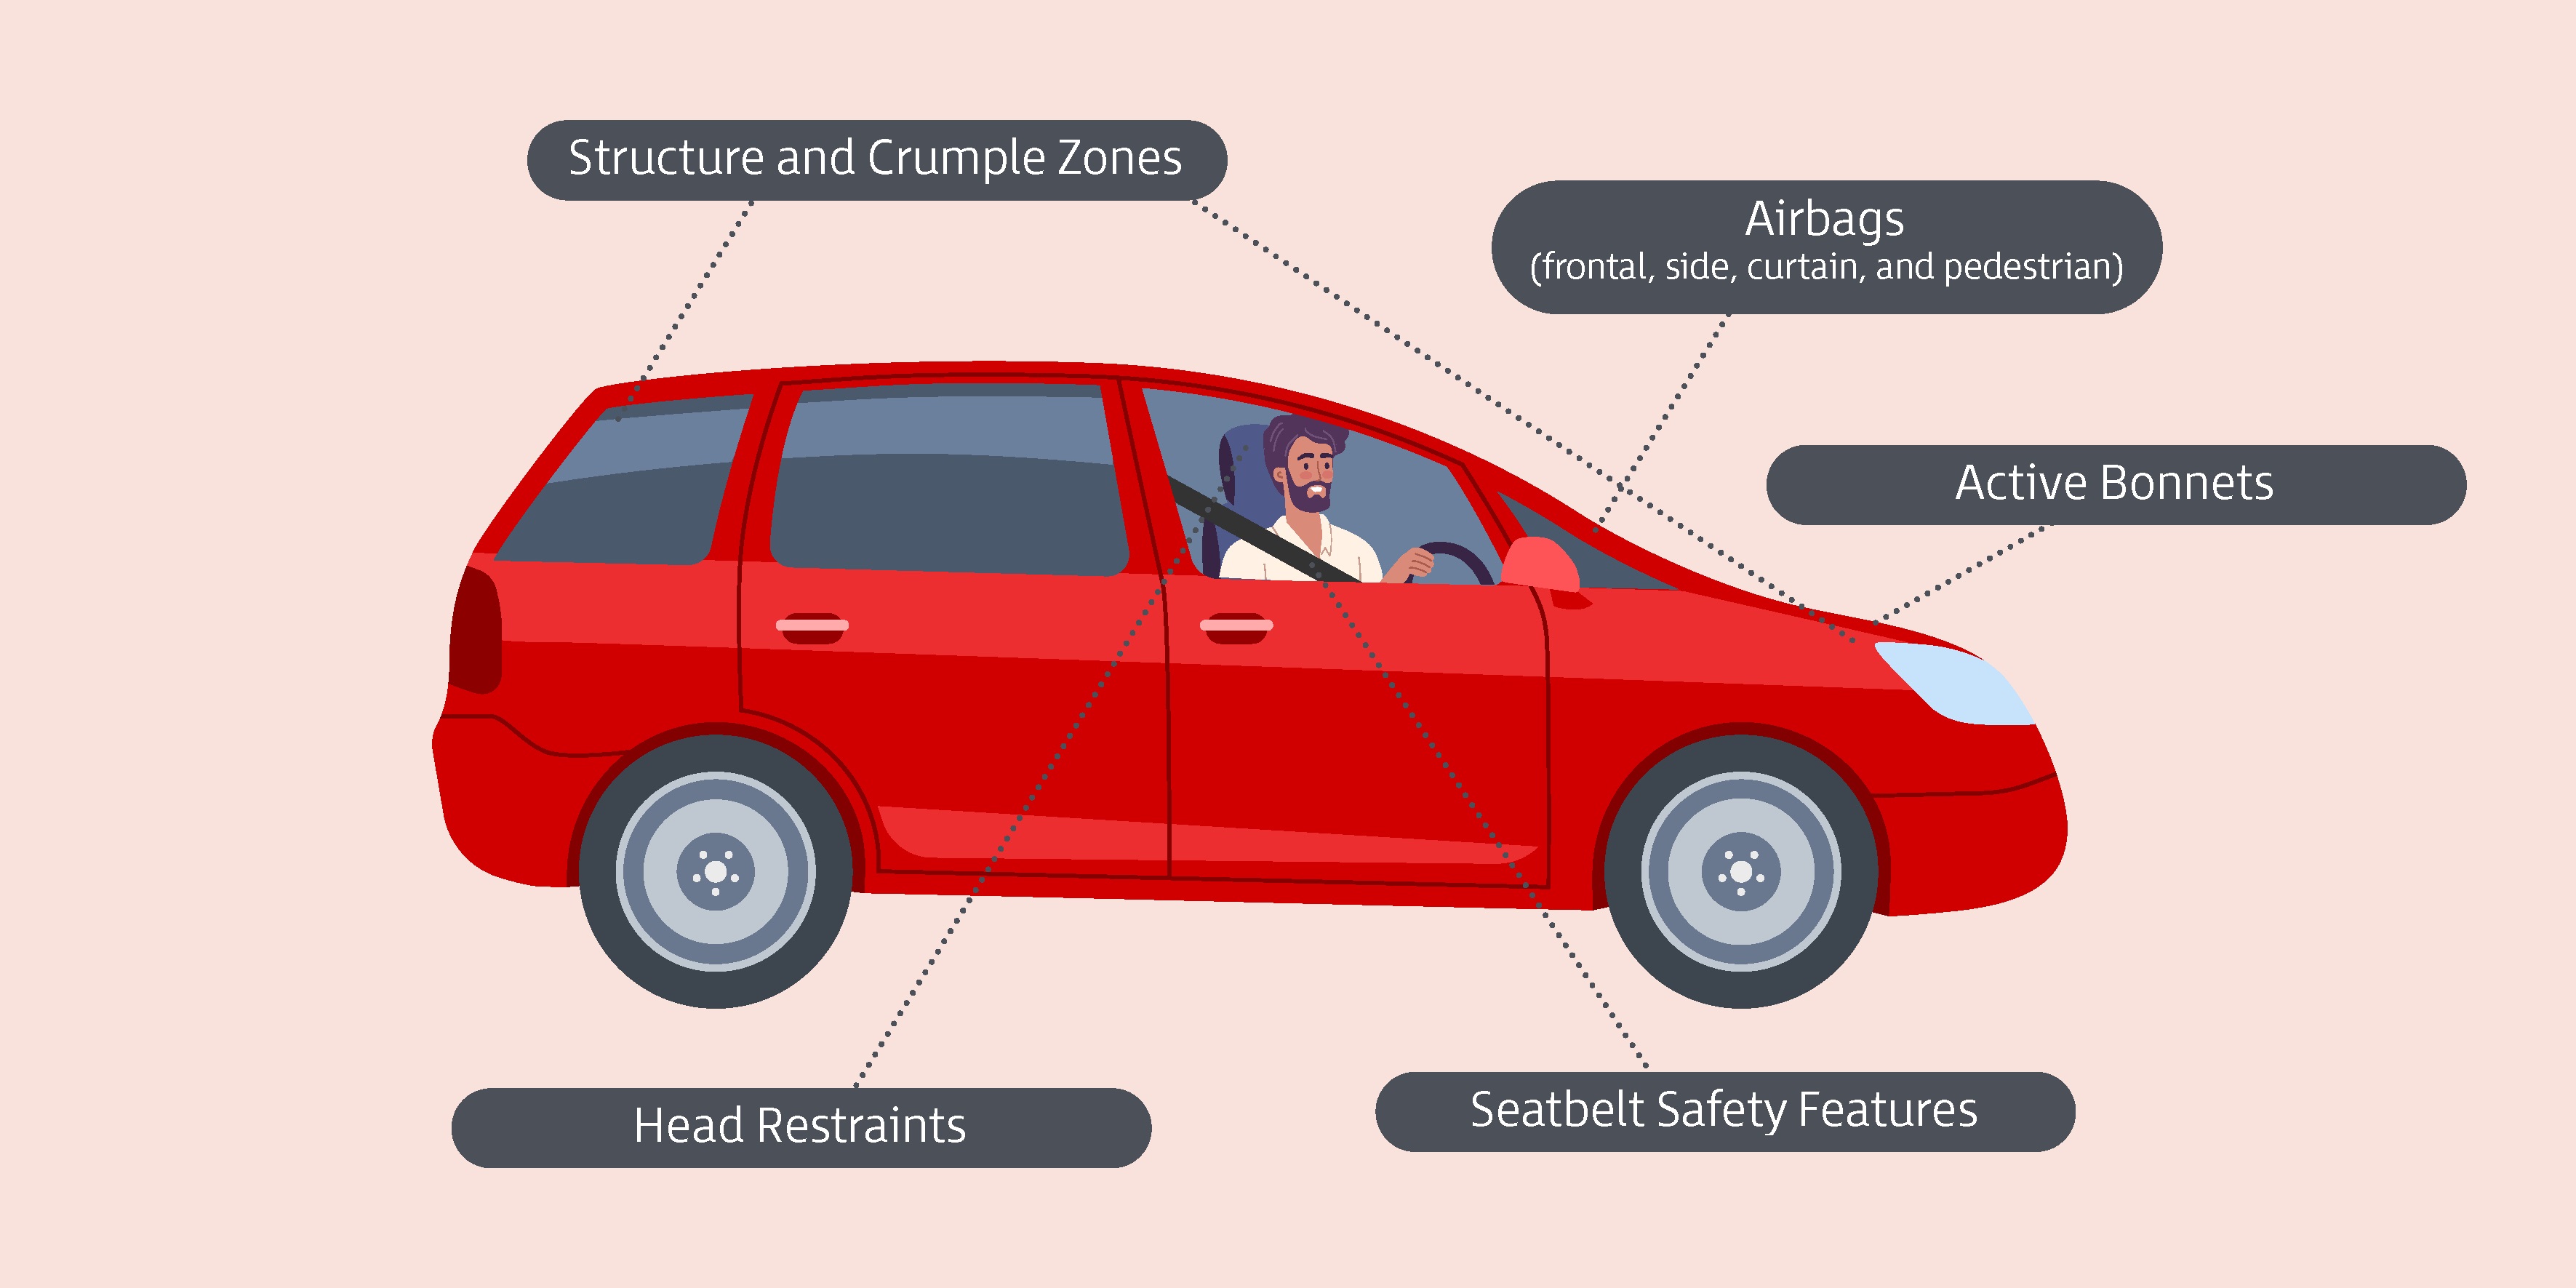 Crash protection features such as airbags and active bonnets can save lives.